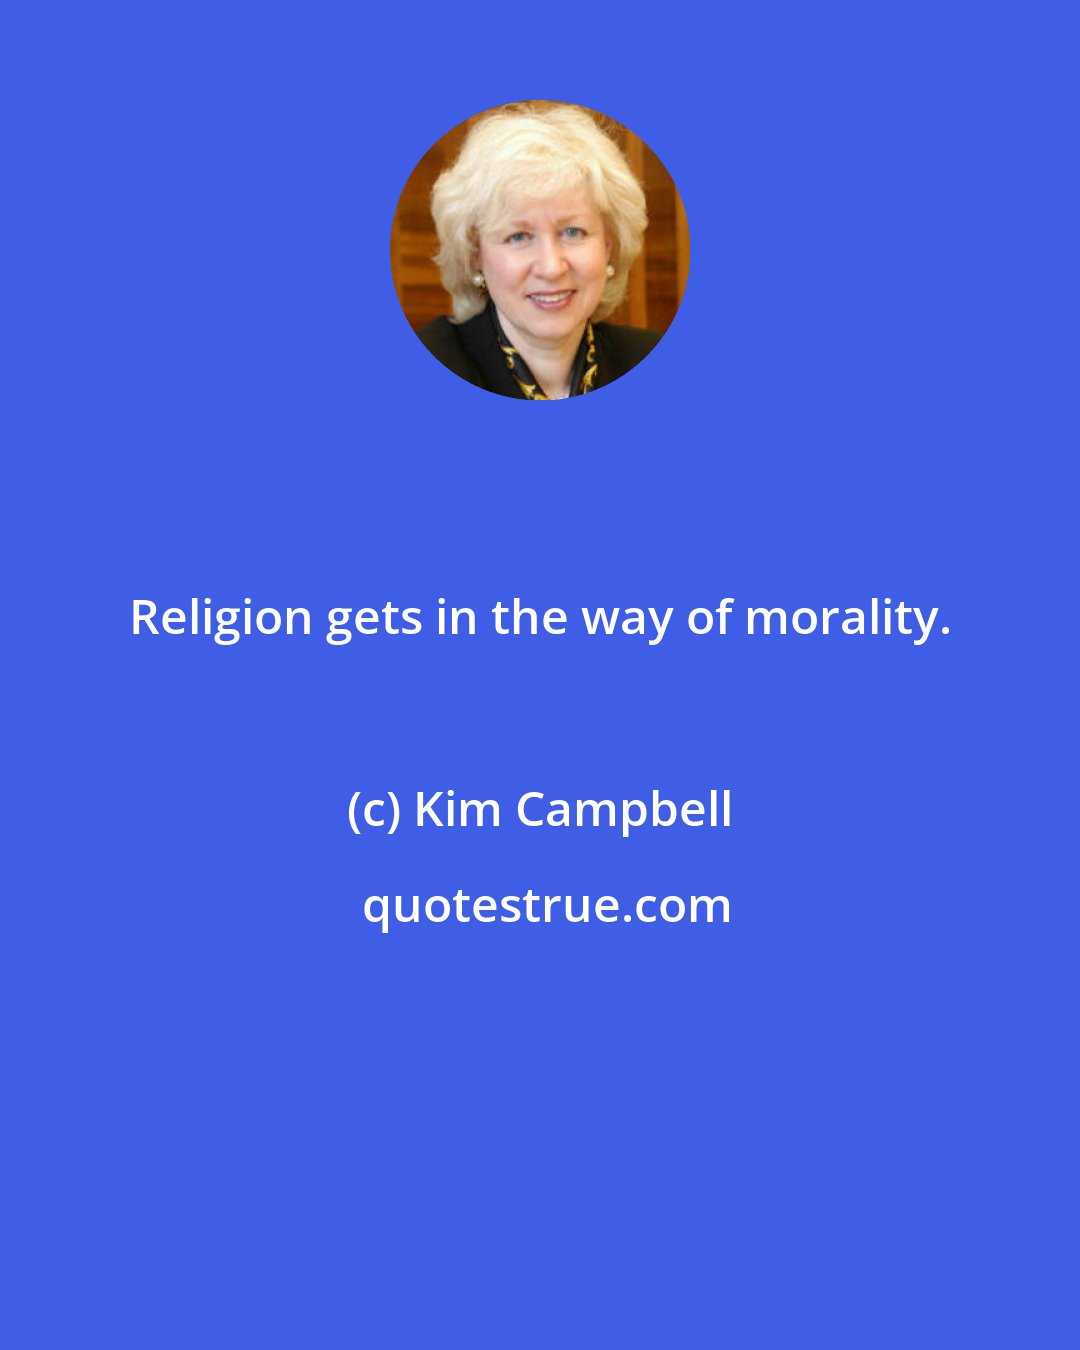 Kim Campbell: Religion gets in the way of morality.